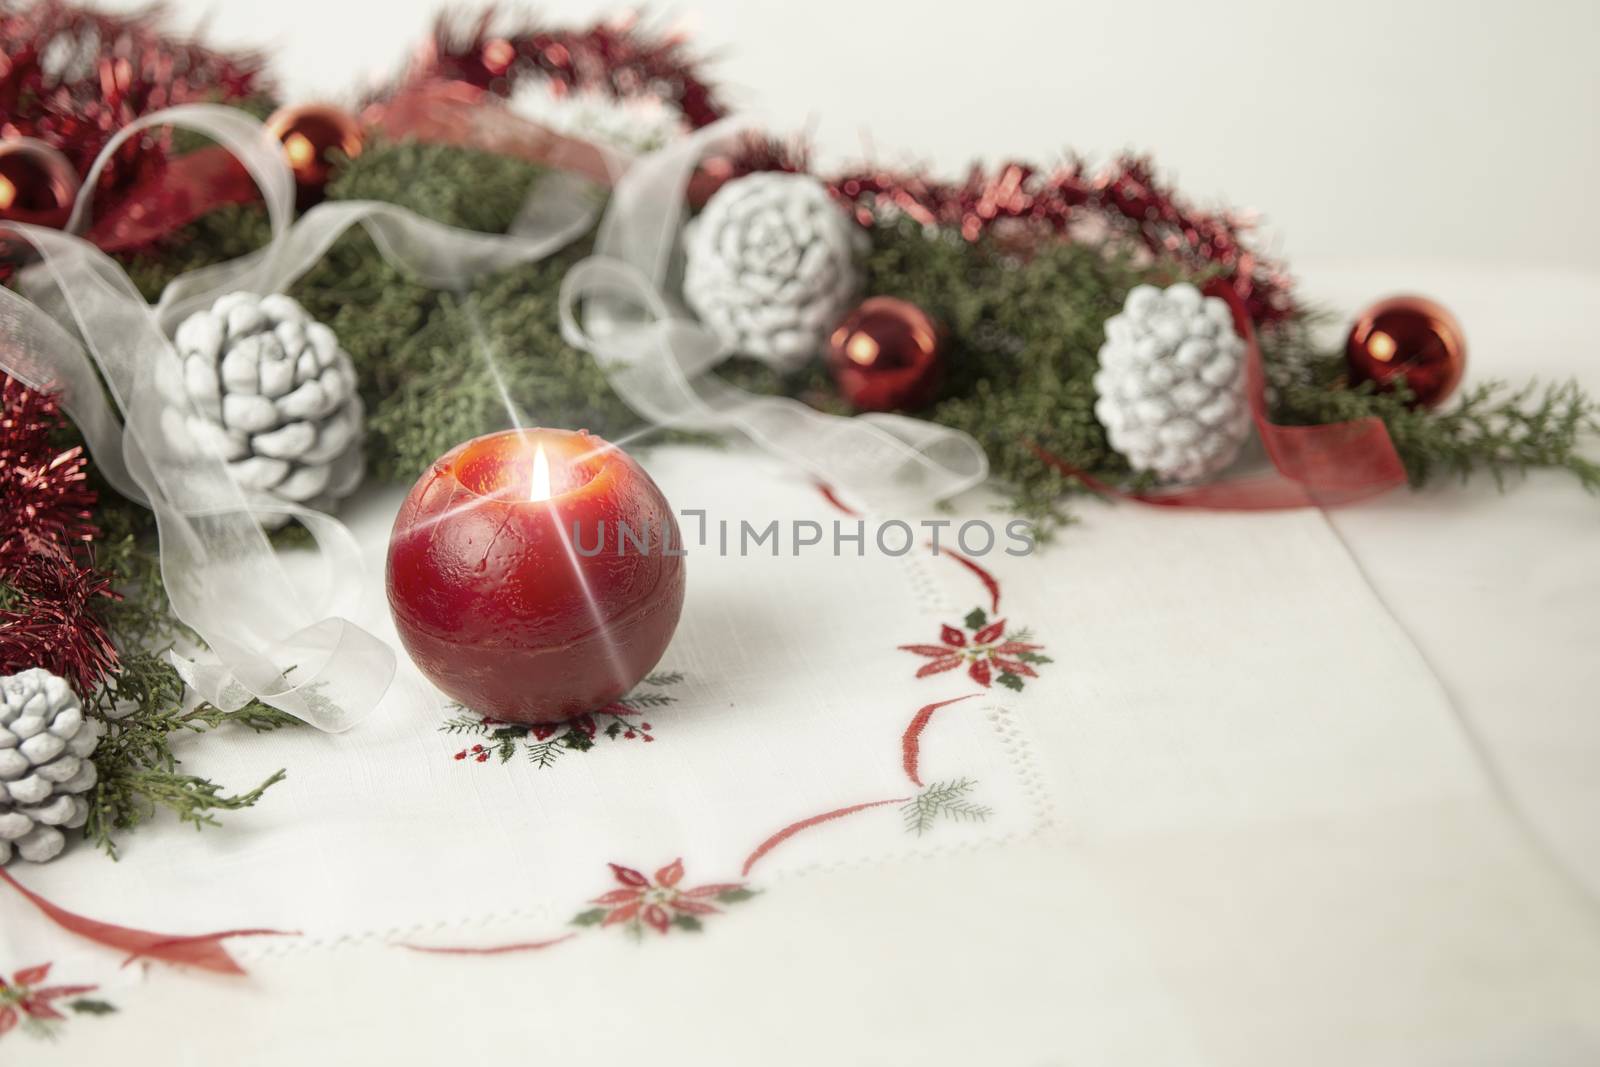 Christmas setting: a red lit candle with cross screen effect on foreground surrounded by pine branches, red baubles, red and white ribbons, white pine cones on Christmas tablecloth in bokeh effect